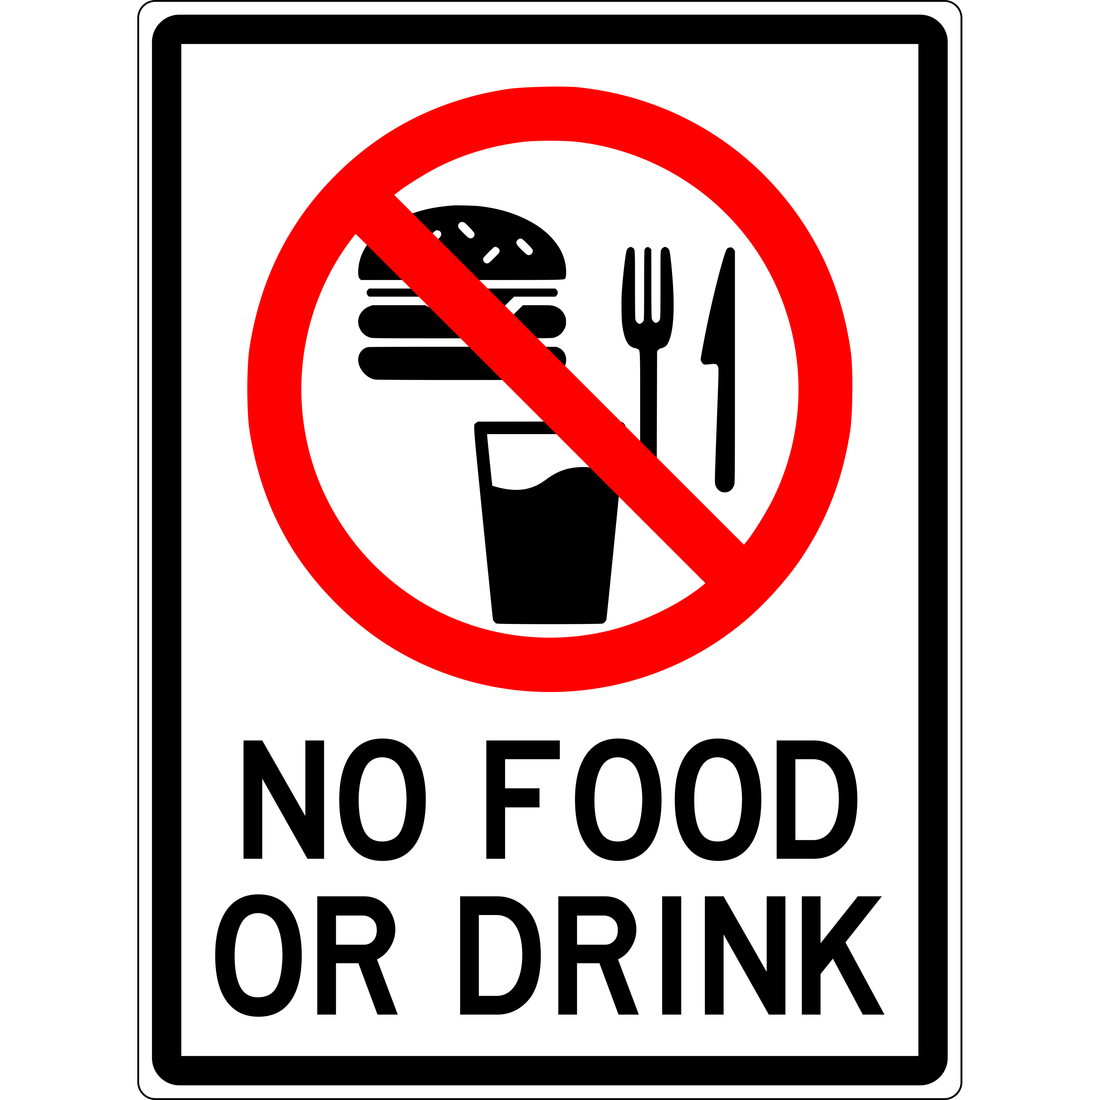 PROHIBITION - NO FOOD OR DRINK